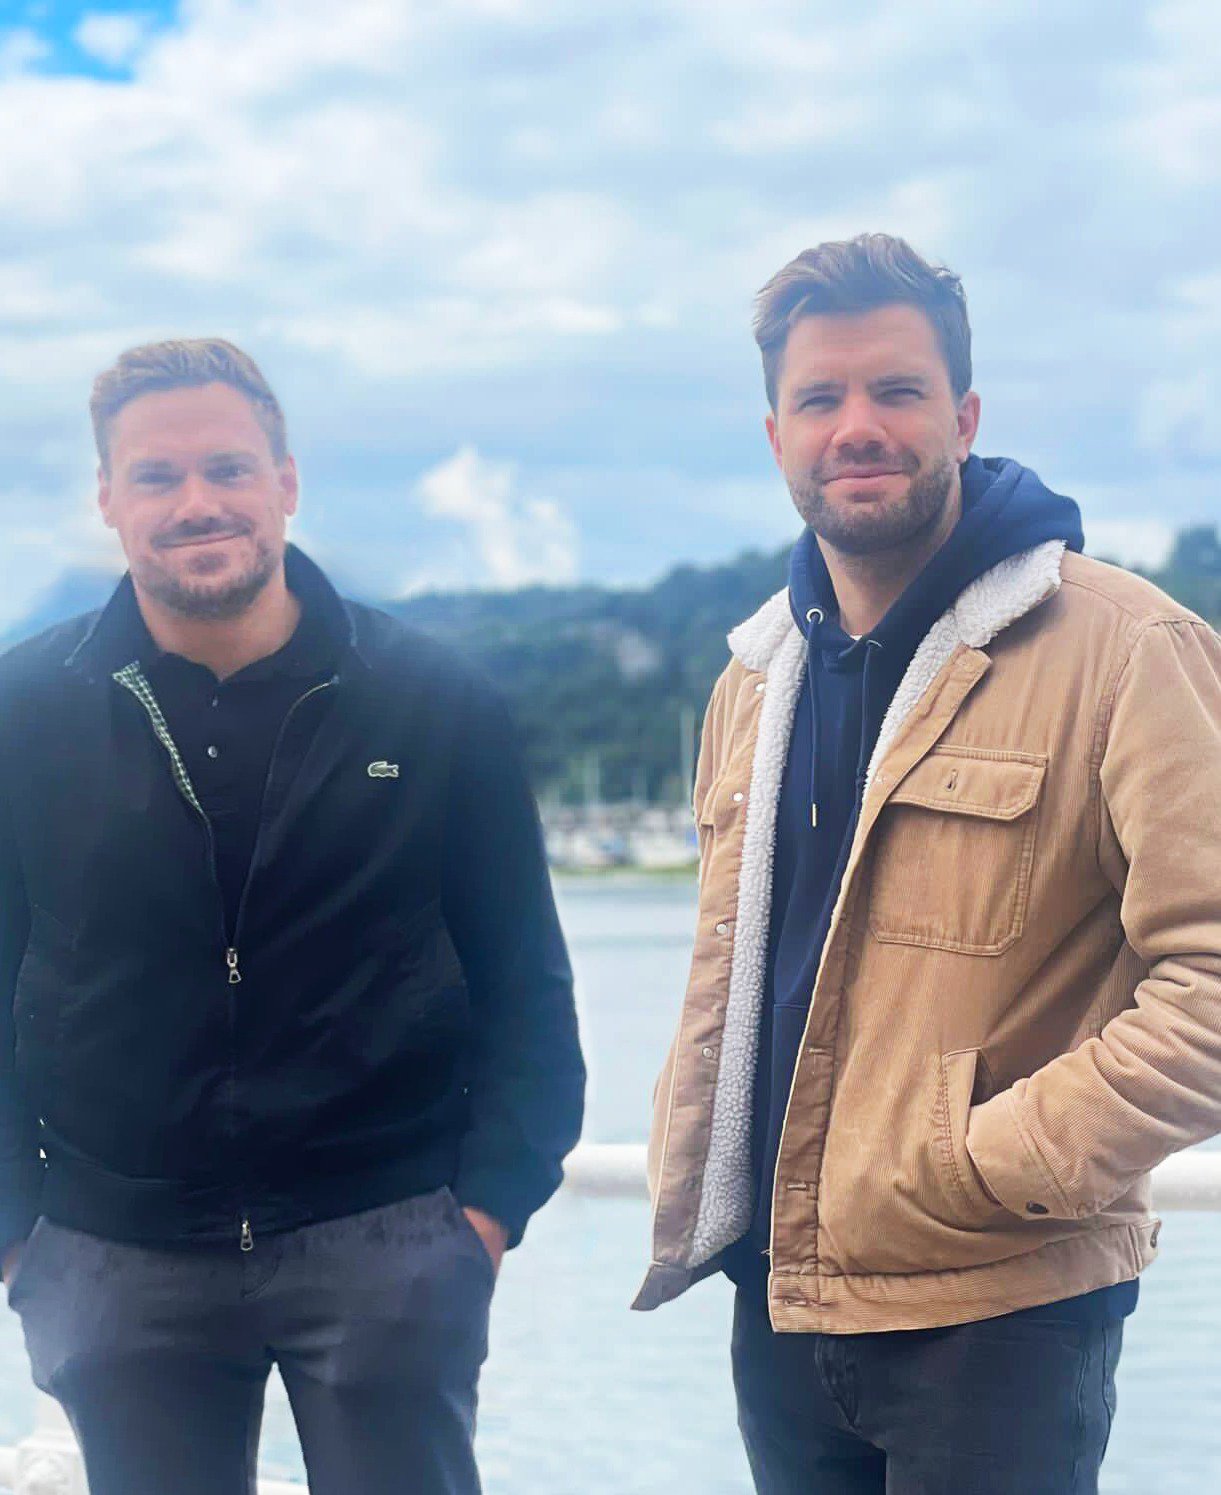 Belgian startup Whale raises 2.5 million euros to boost knowledge sharing and employee training for companies worldwide.